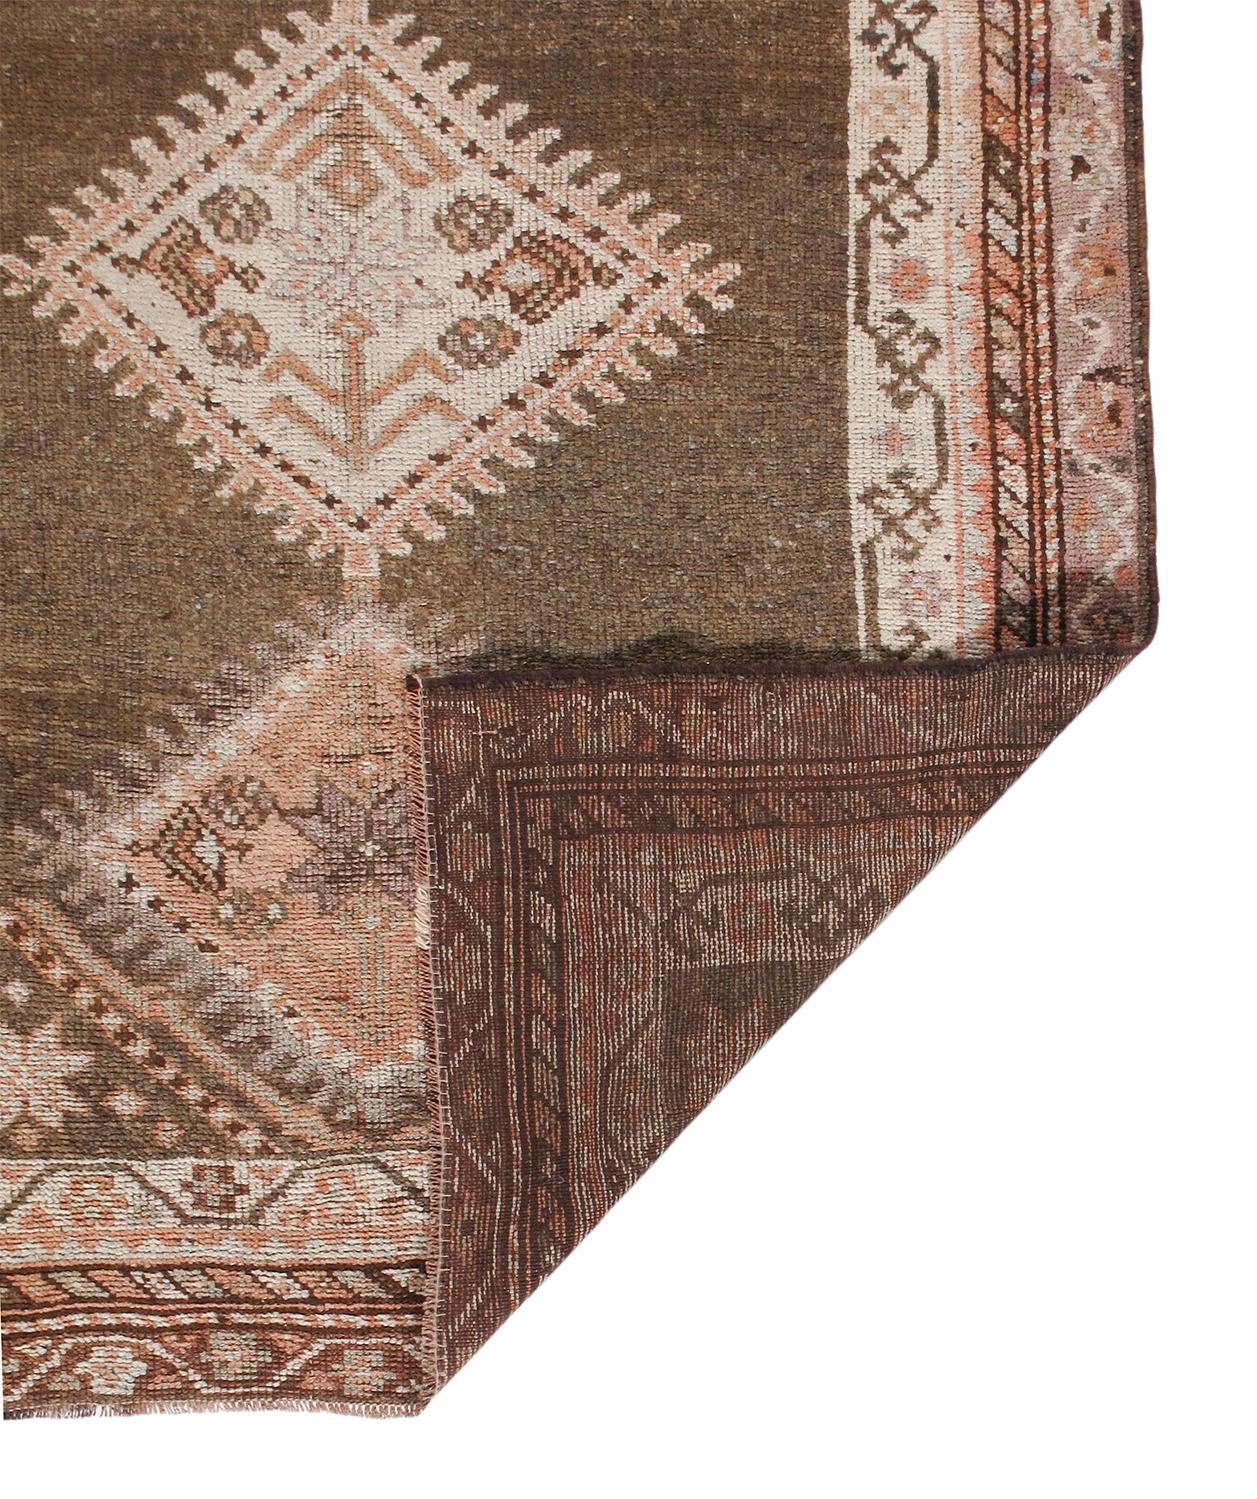 Early 20th Century Antique Persian Kurdish Runner Rug  For Sale